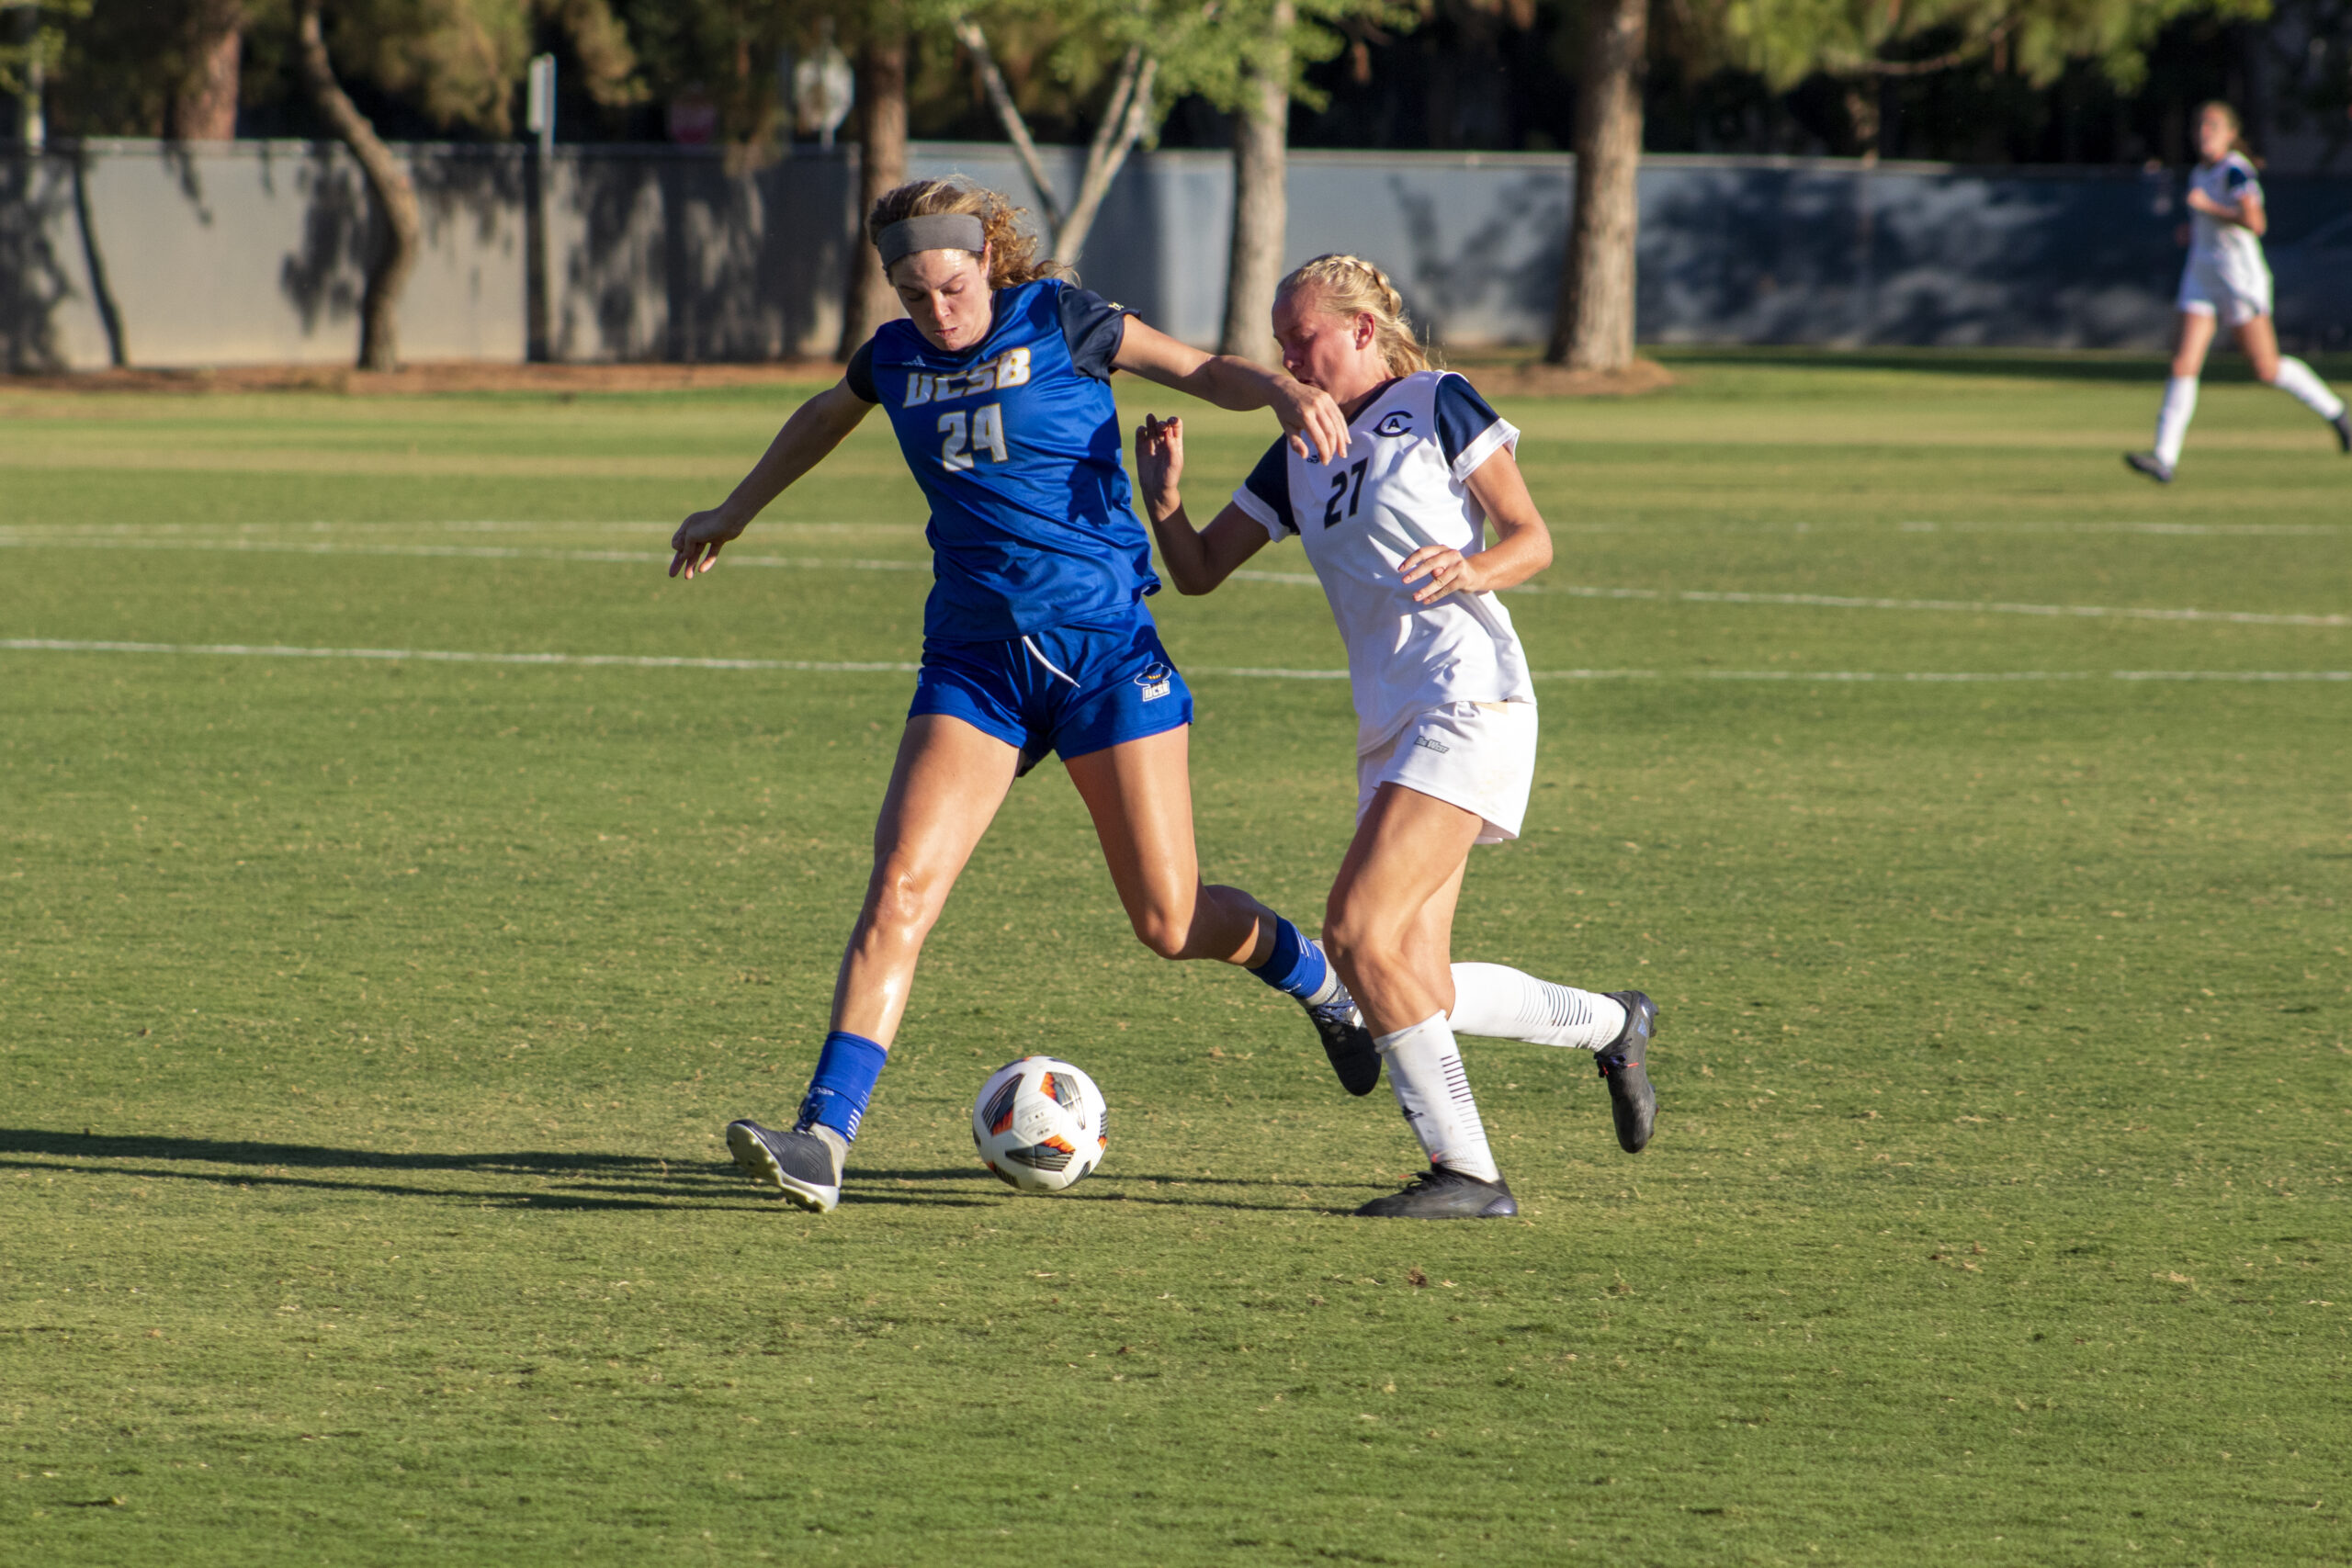 Two women playing soccer, Aggie's try to steal the ball.